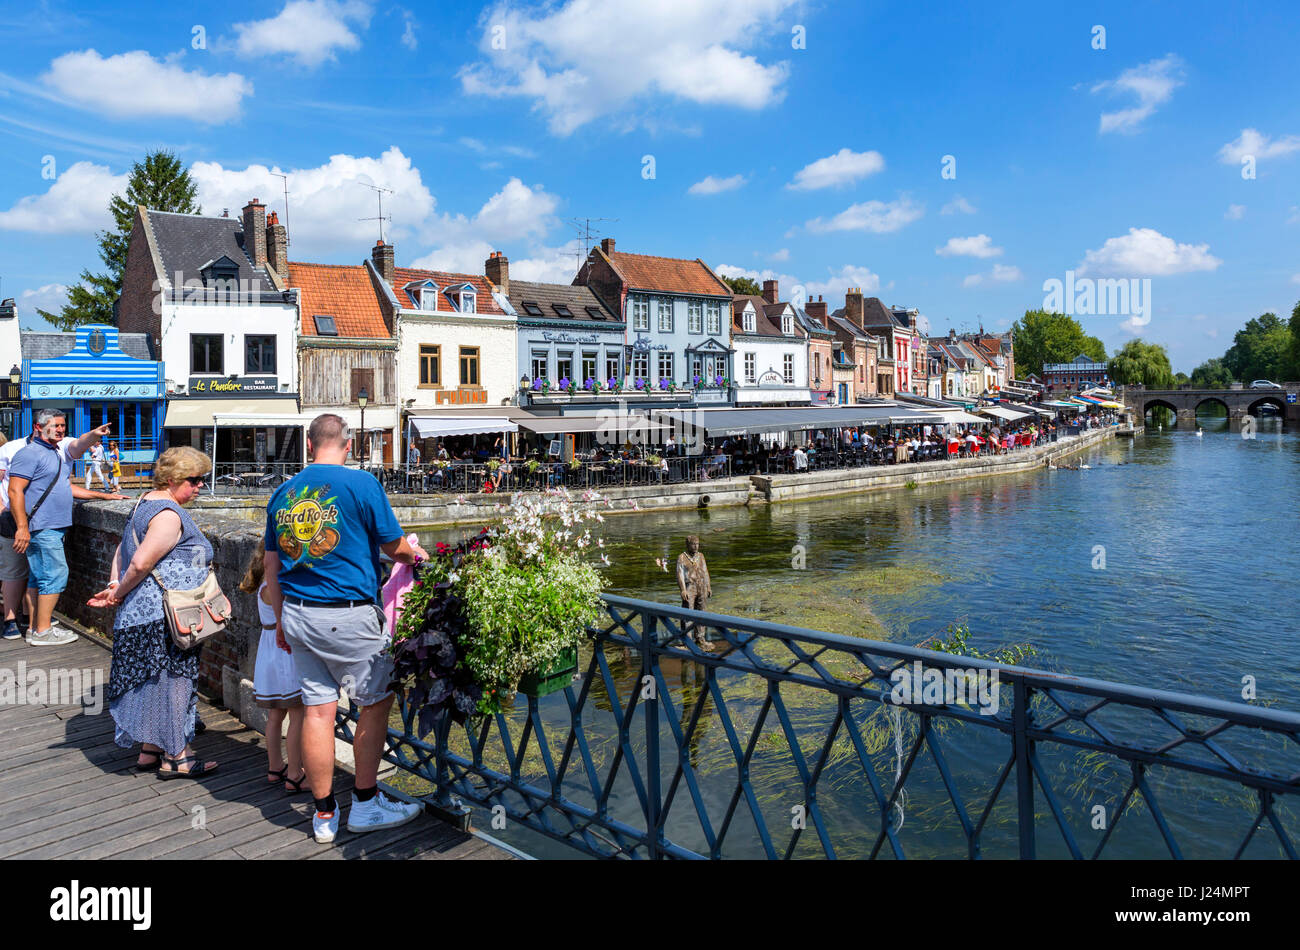 The River Somme and Quai Bleu in the Quartier St-Leu, Amiens, Picardy, France Stock Photo